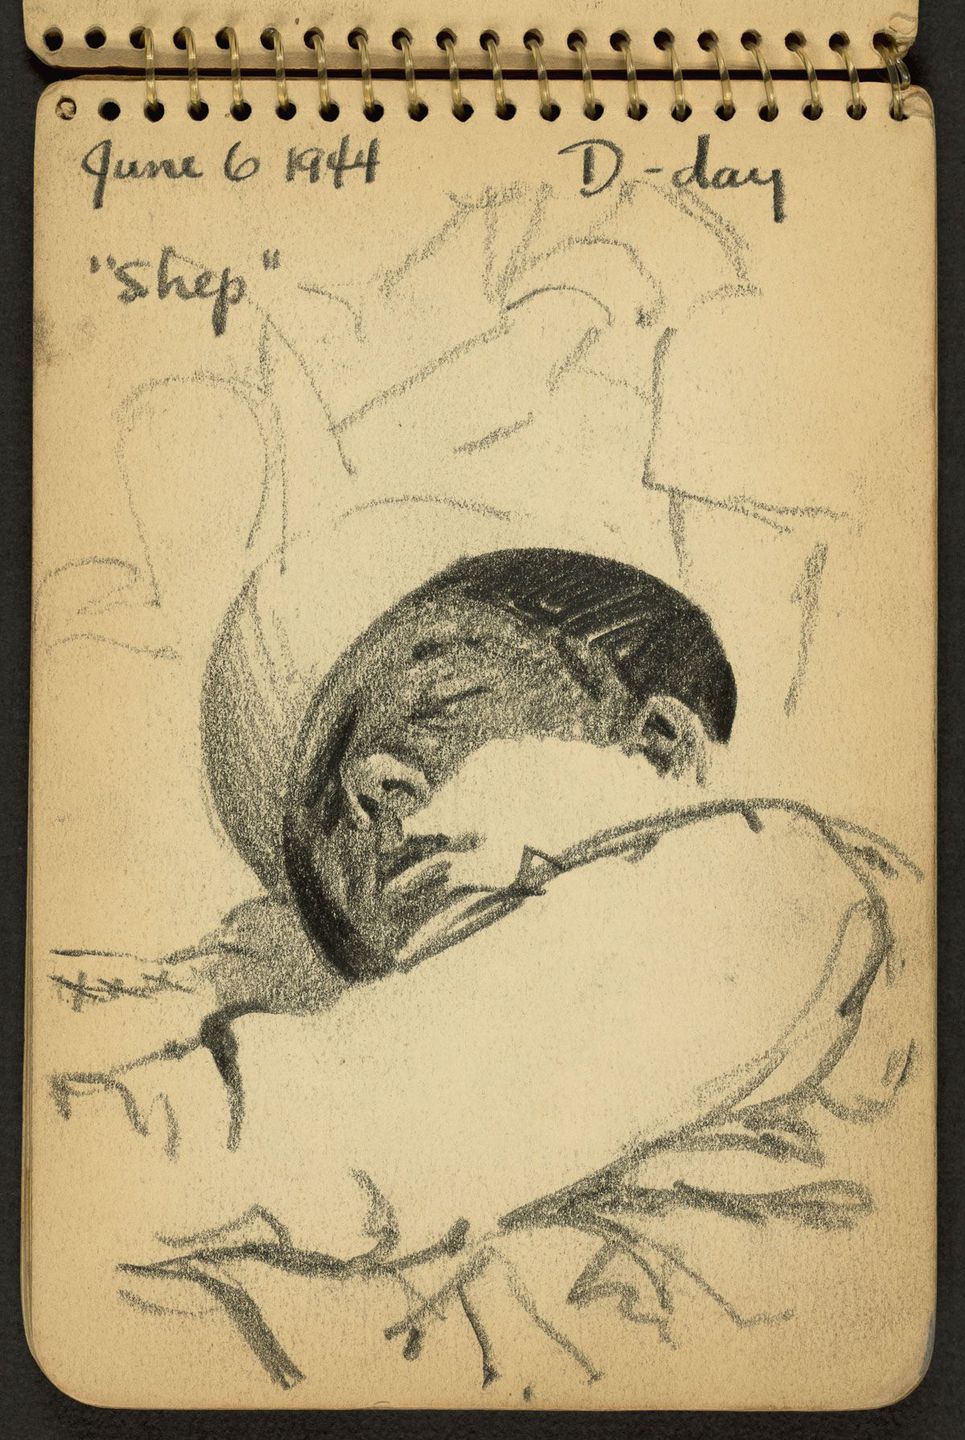 World War II Sketches by Victor A. Lundy